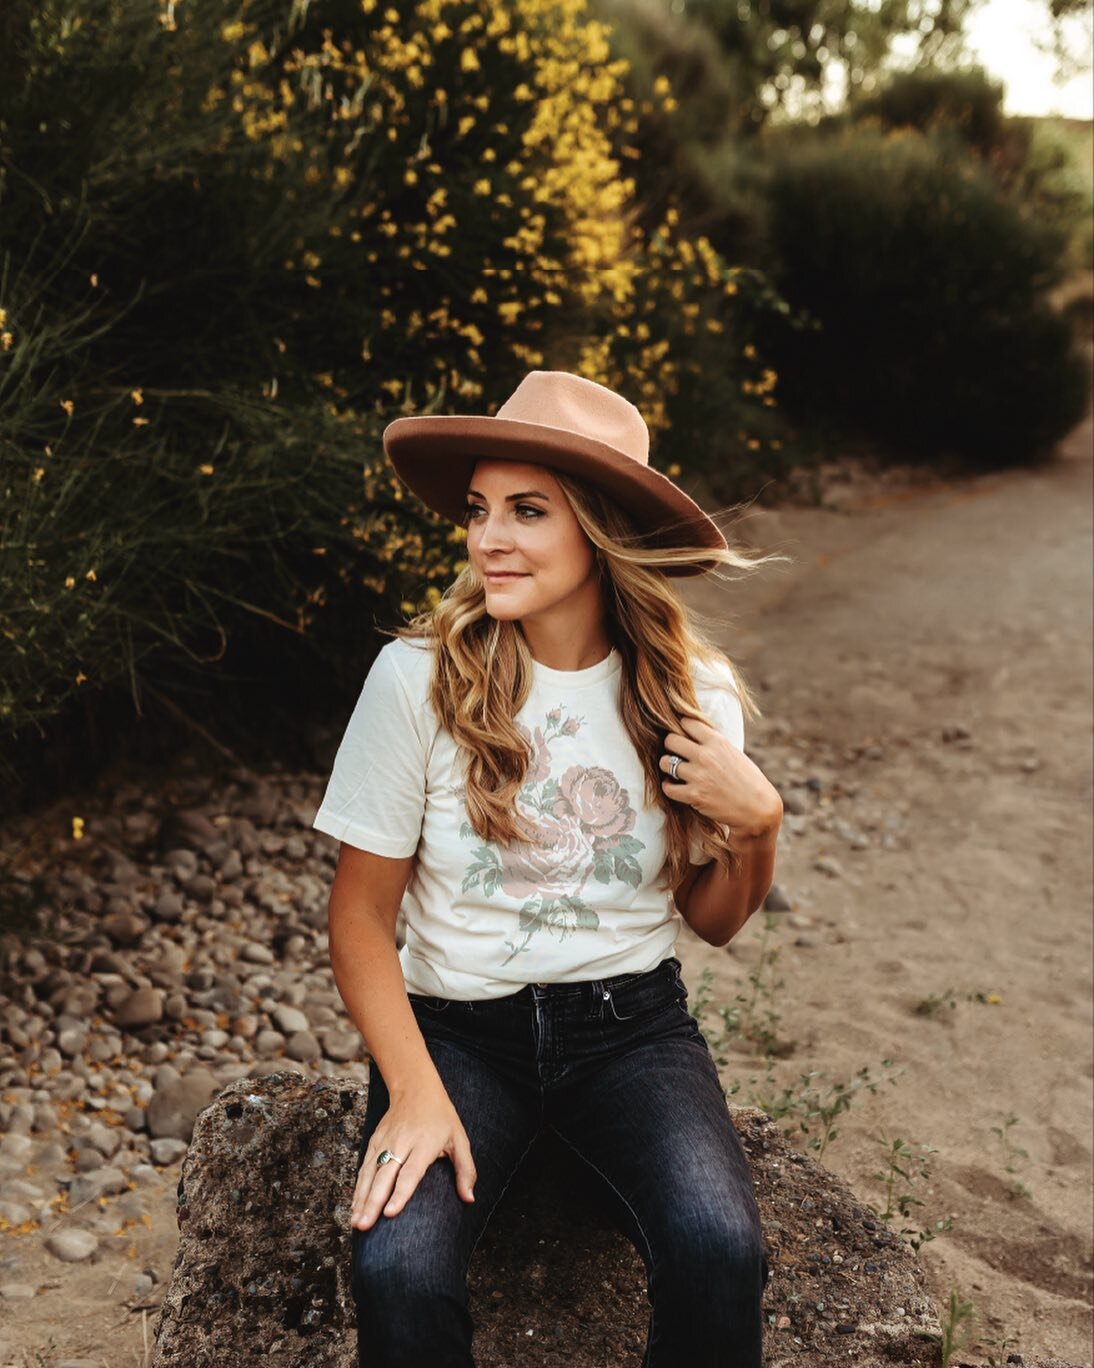 The Nan in roses 💕 

#twinsisters #westernwear #madeinamerica #durhamca #chicoca #graphictees #womensfashion #outfits #countrygirl #farmhouse #northerncalifornia #californiacowboy #northerncalifornia